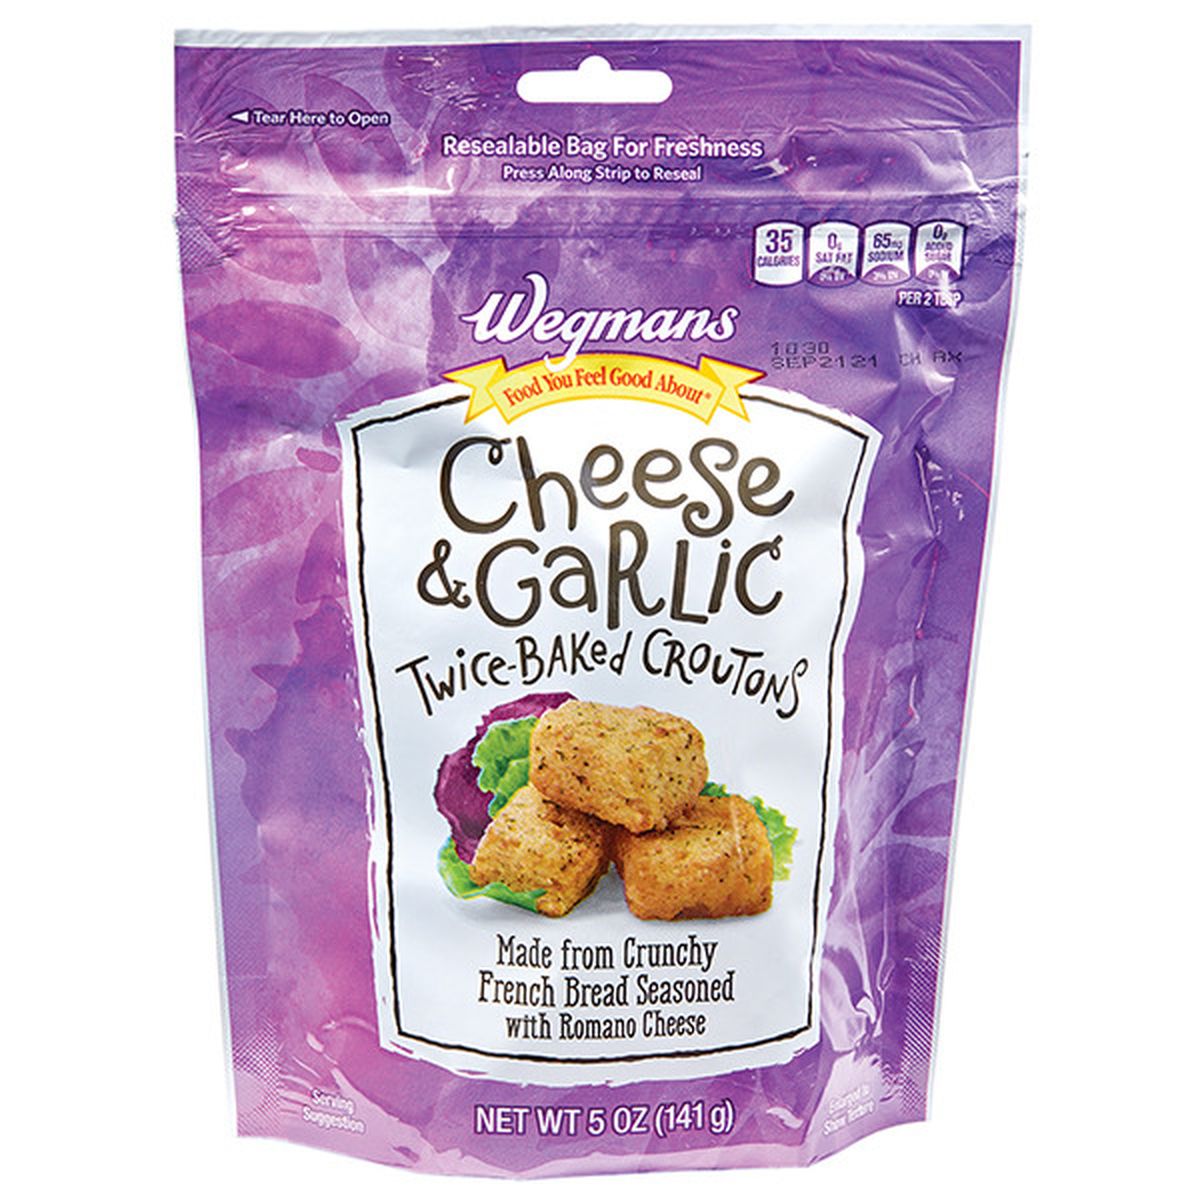 Calories in Wegmans Cheese & Garlic Twice-Baked Croutons